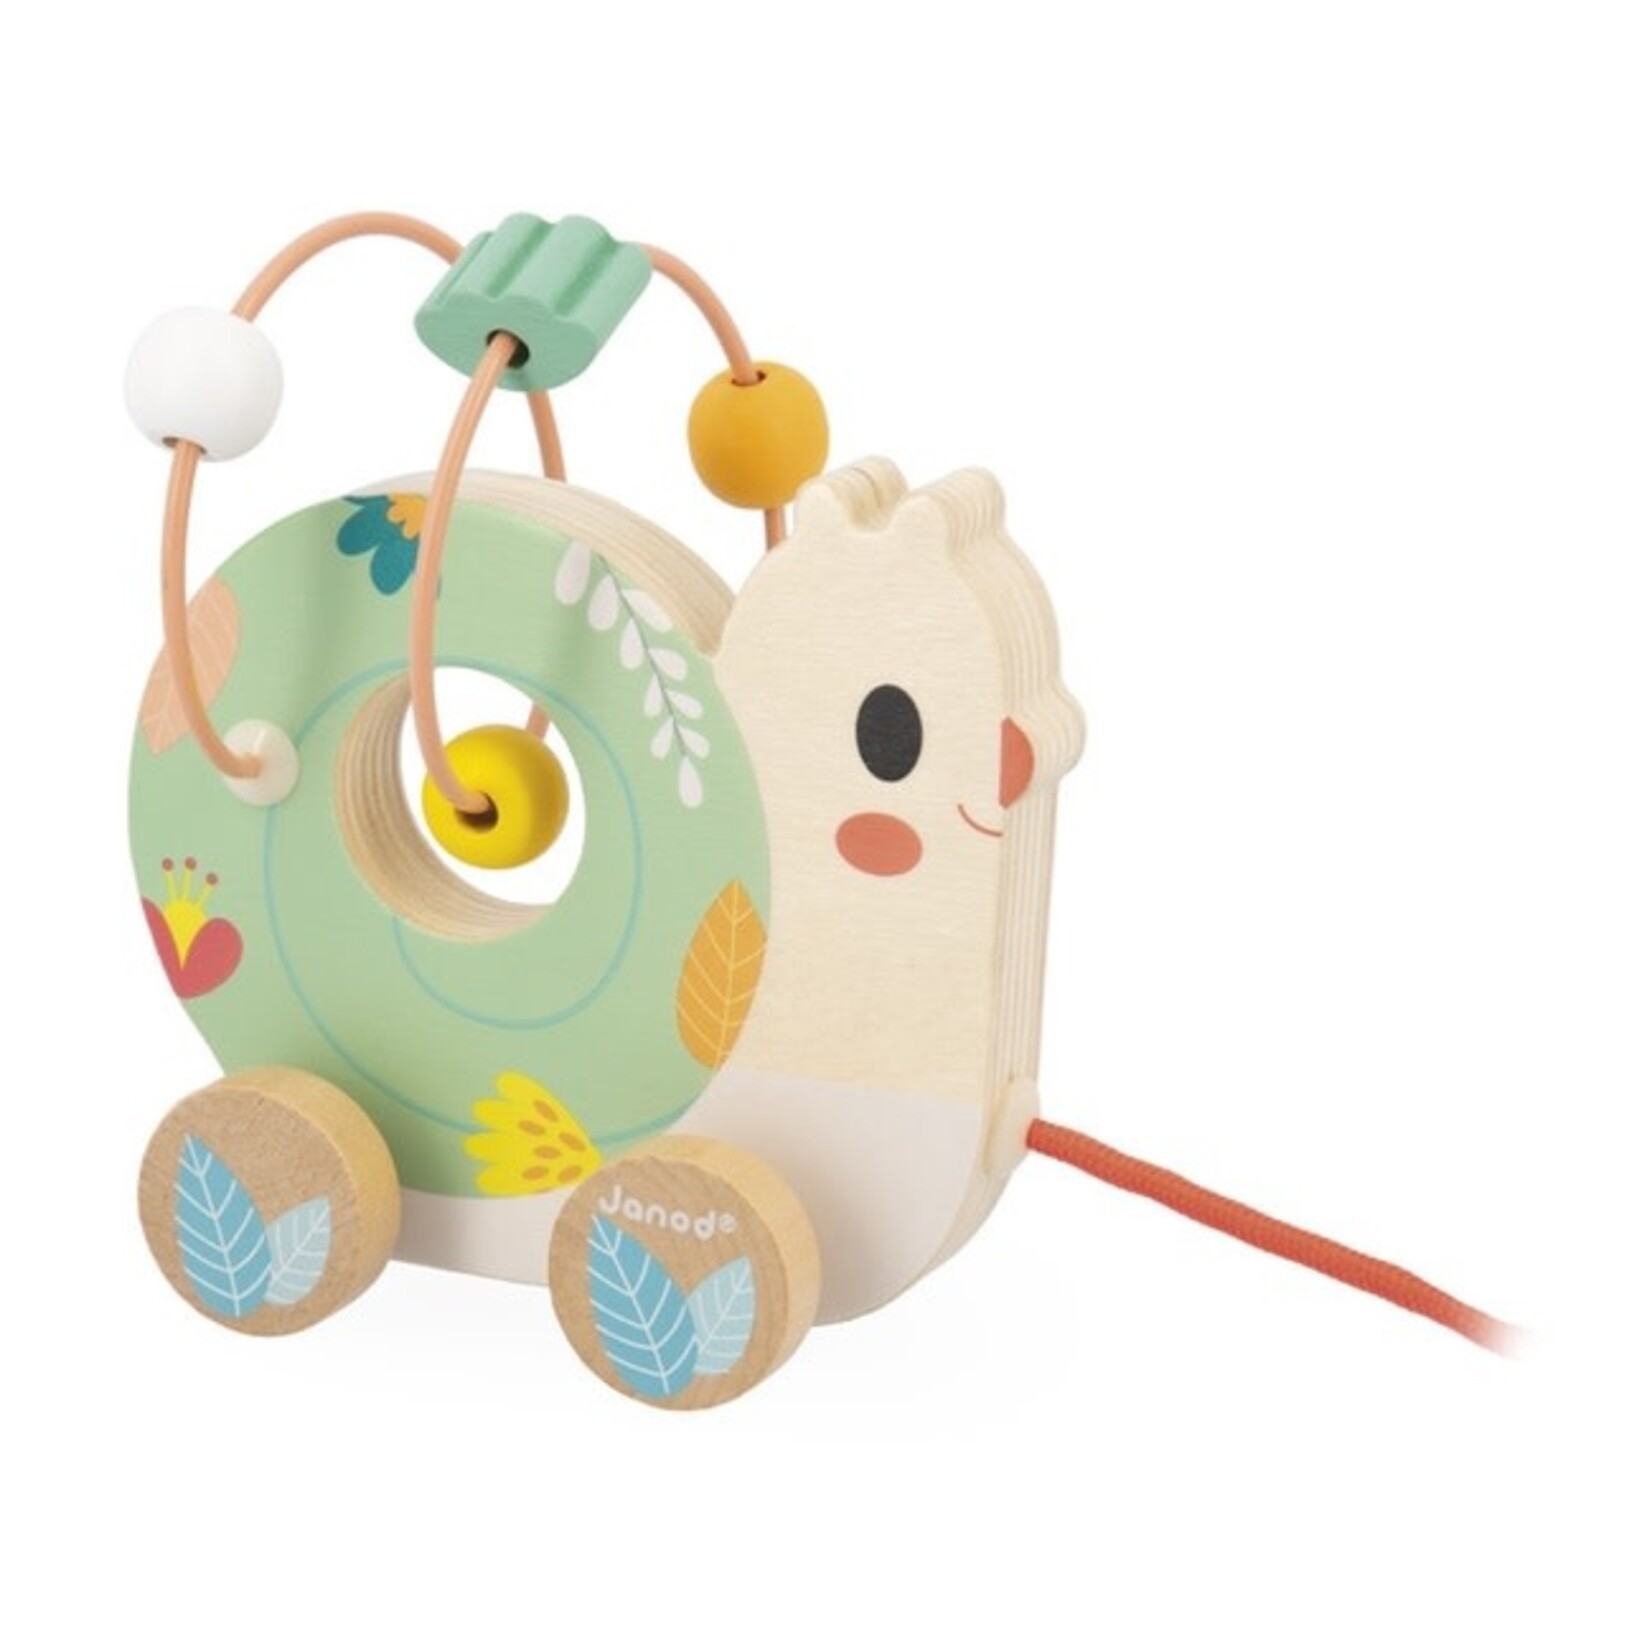 Janod JANOD - 'Baby Looping' Pull Along Toy